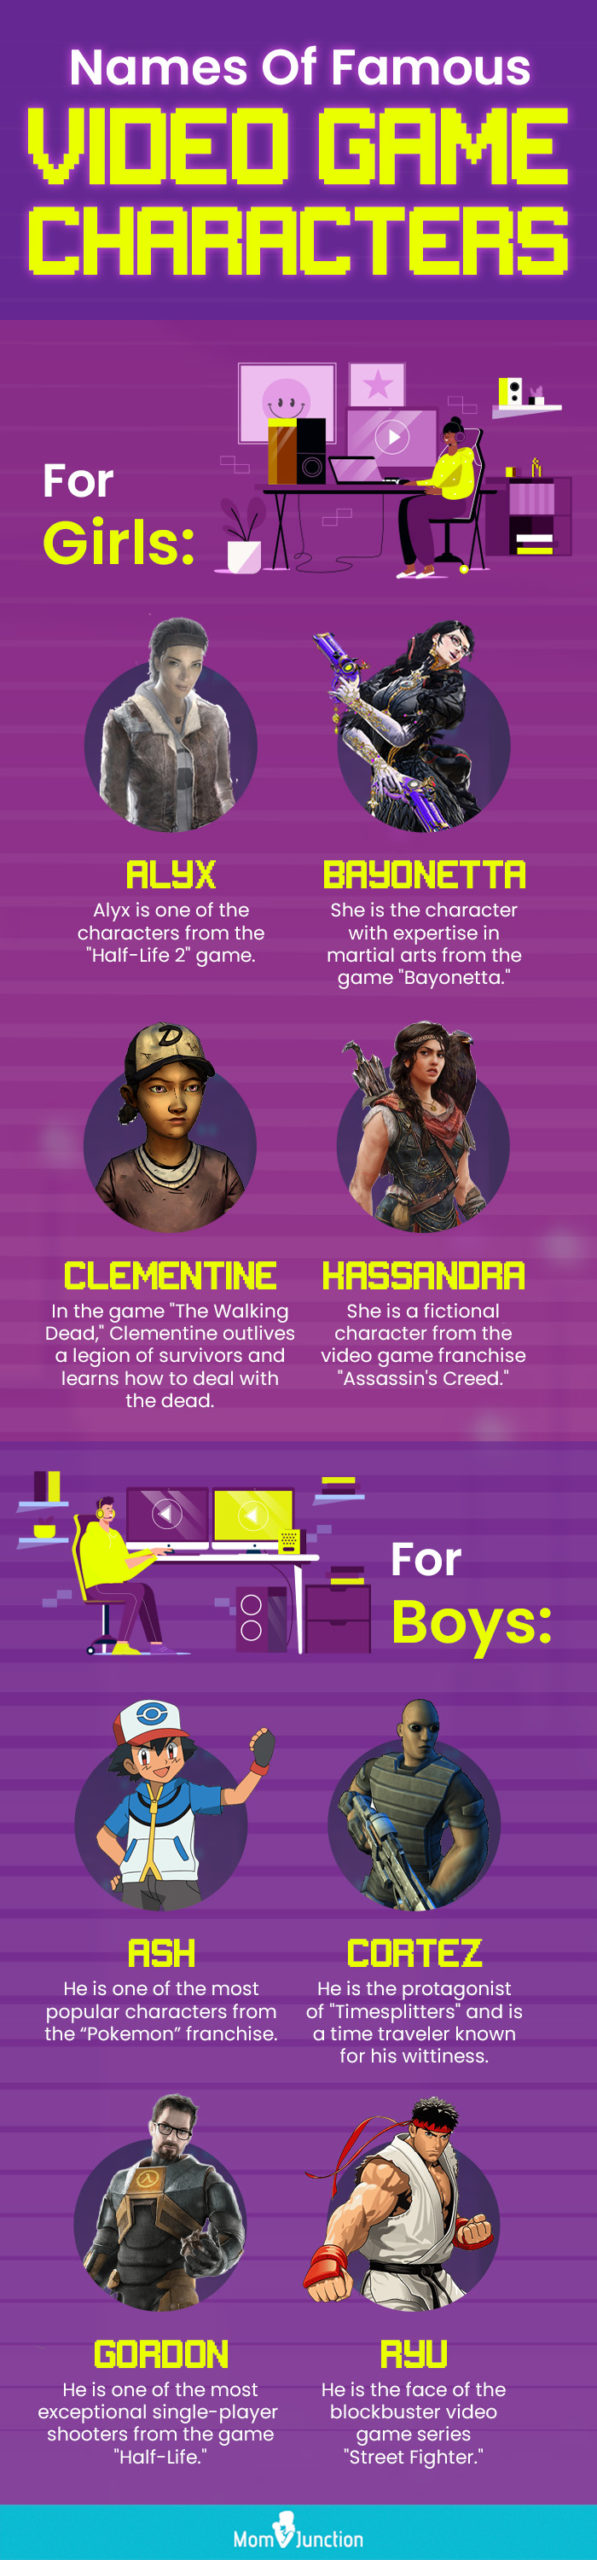 names of famous video game characters (infographic)